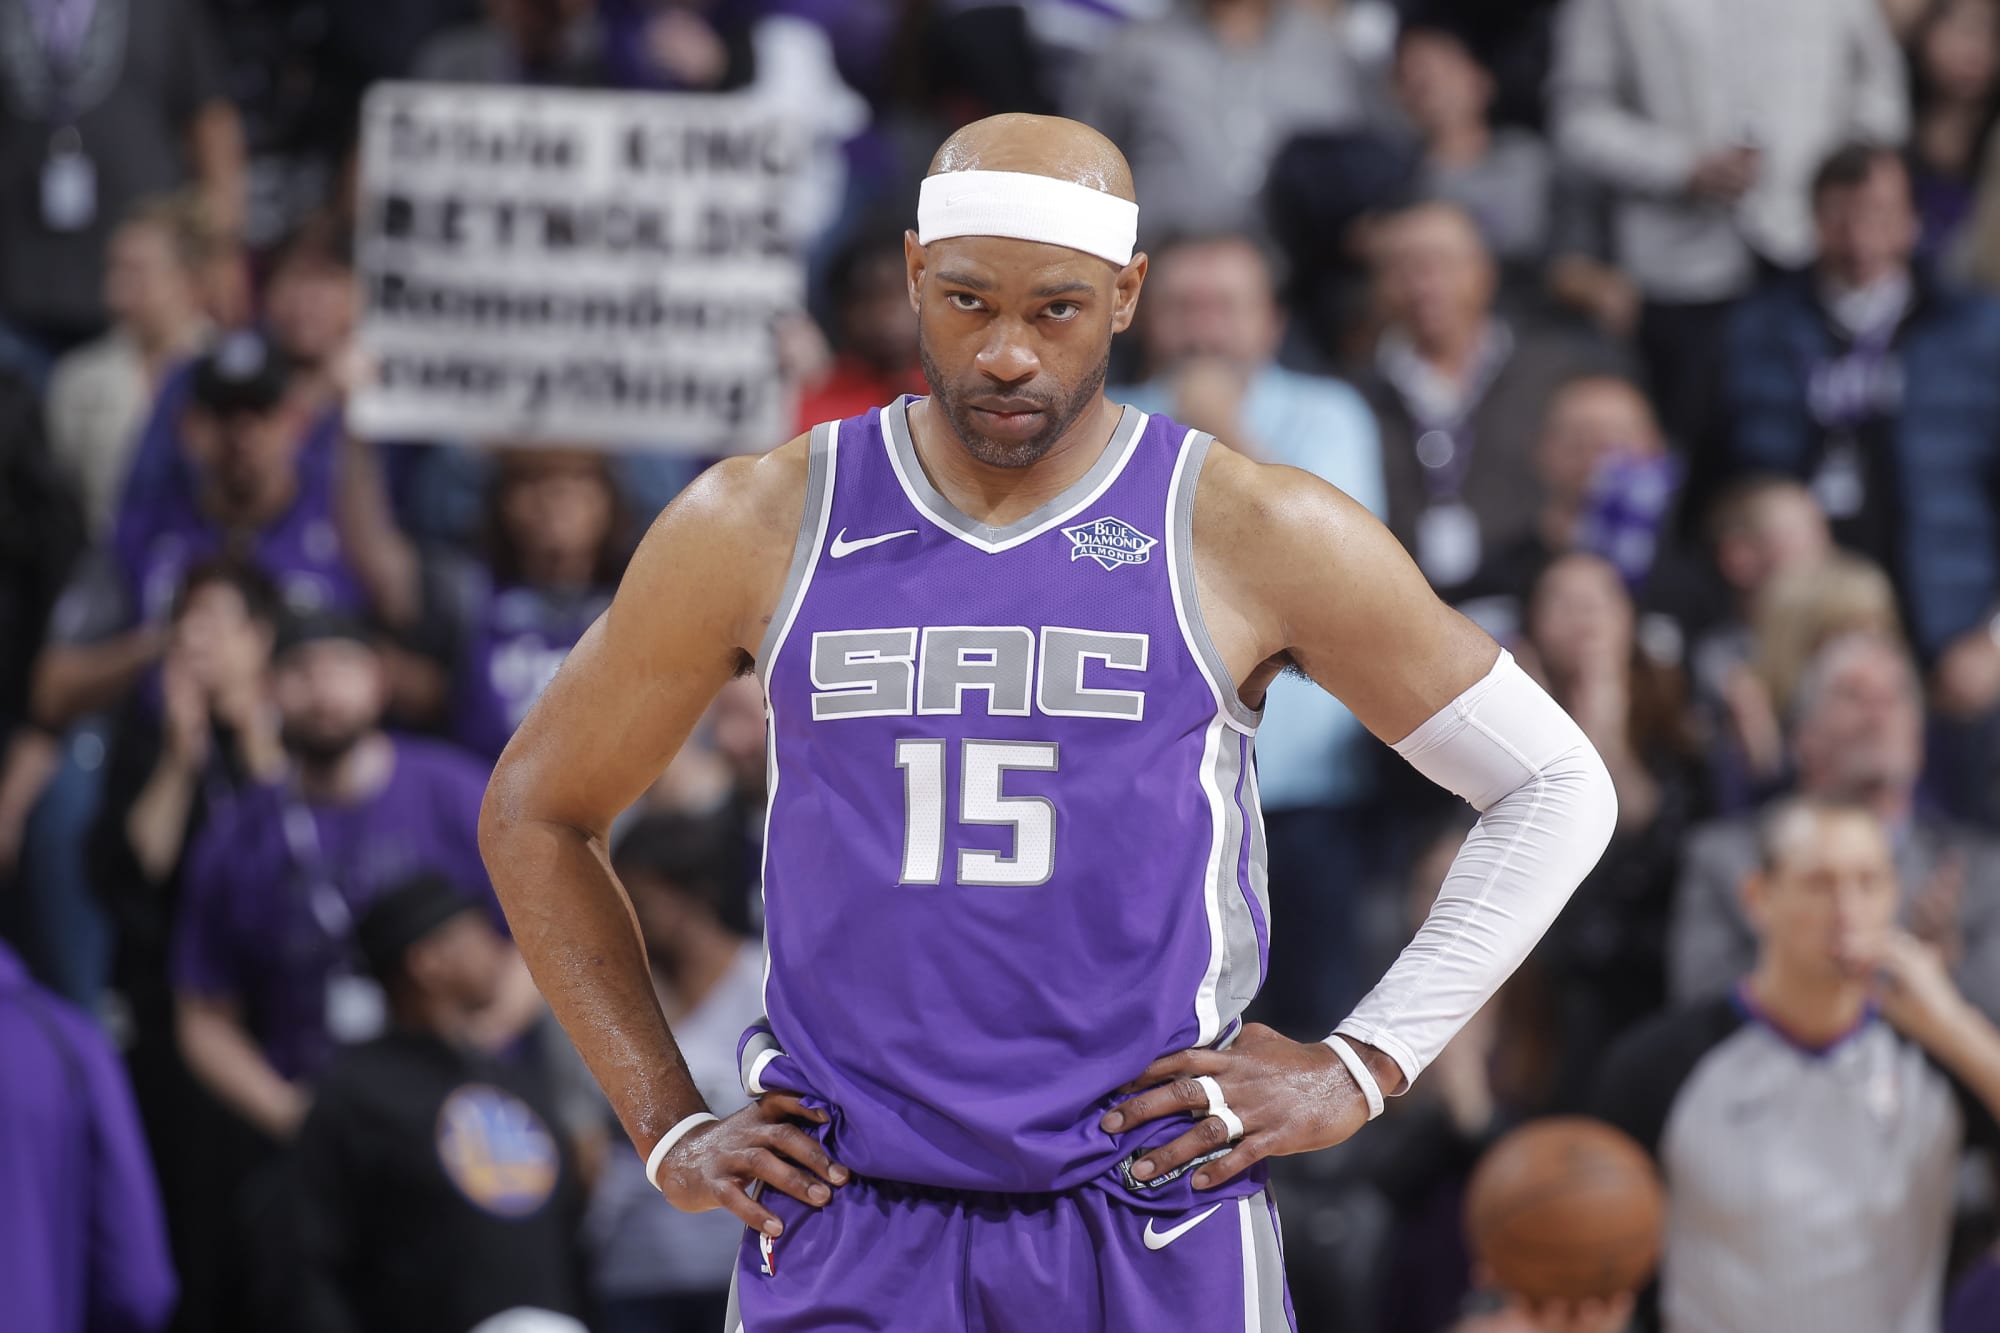 Sacramento Kings: Vince Carter Balled Out In China